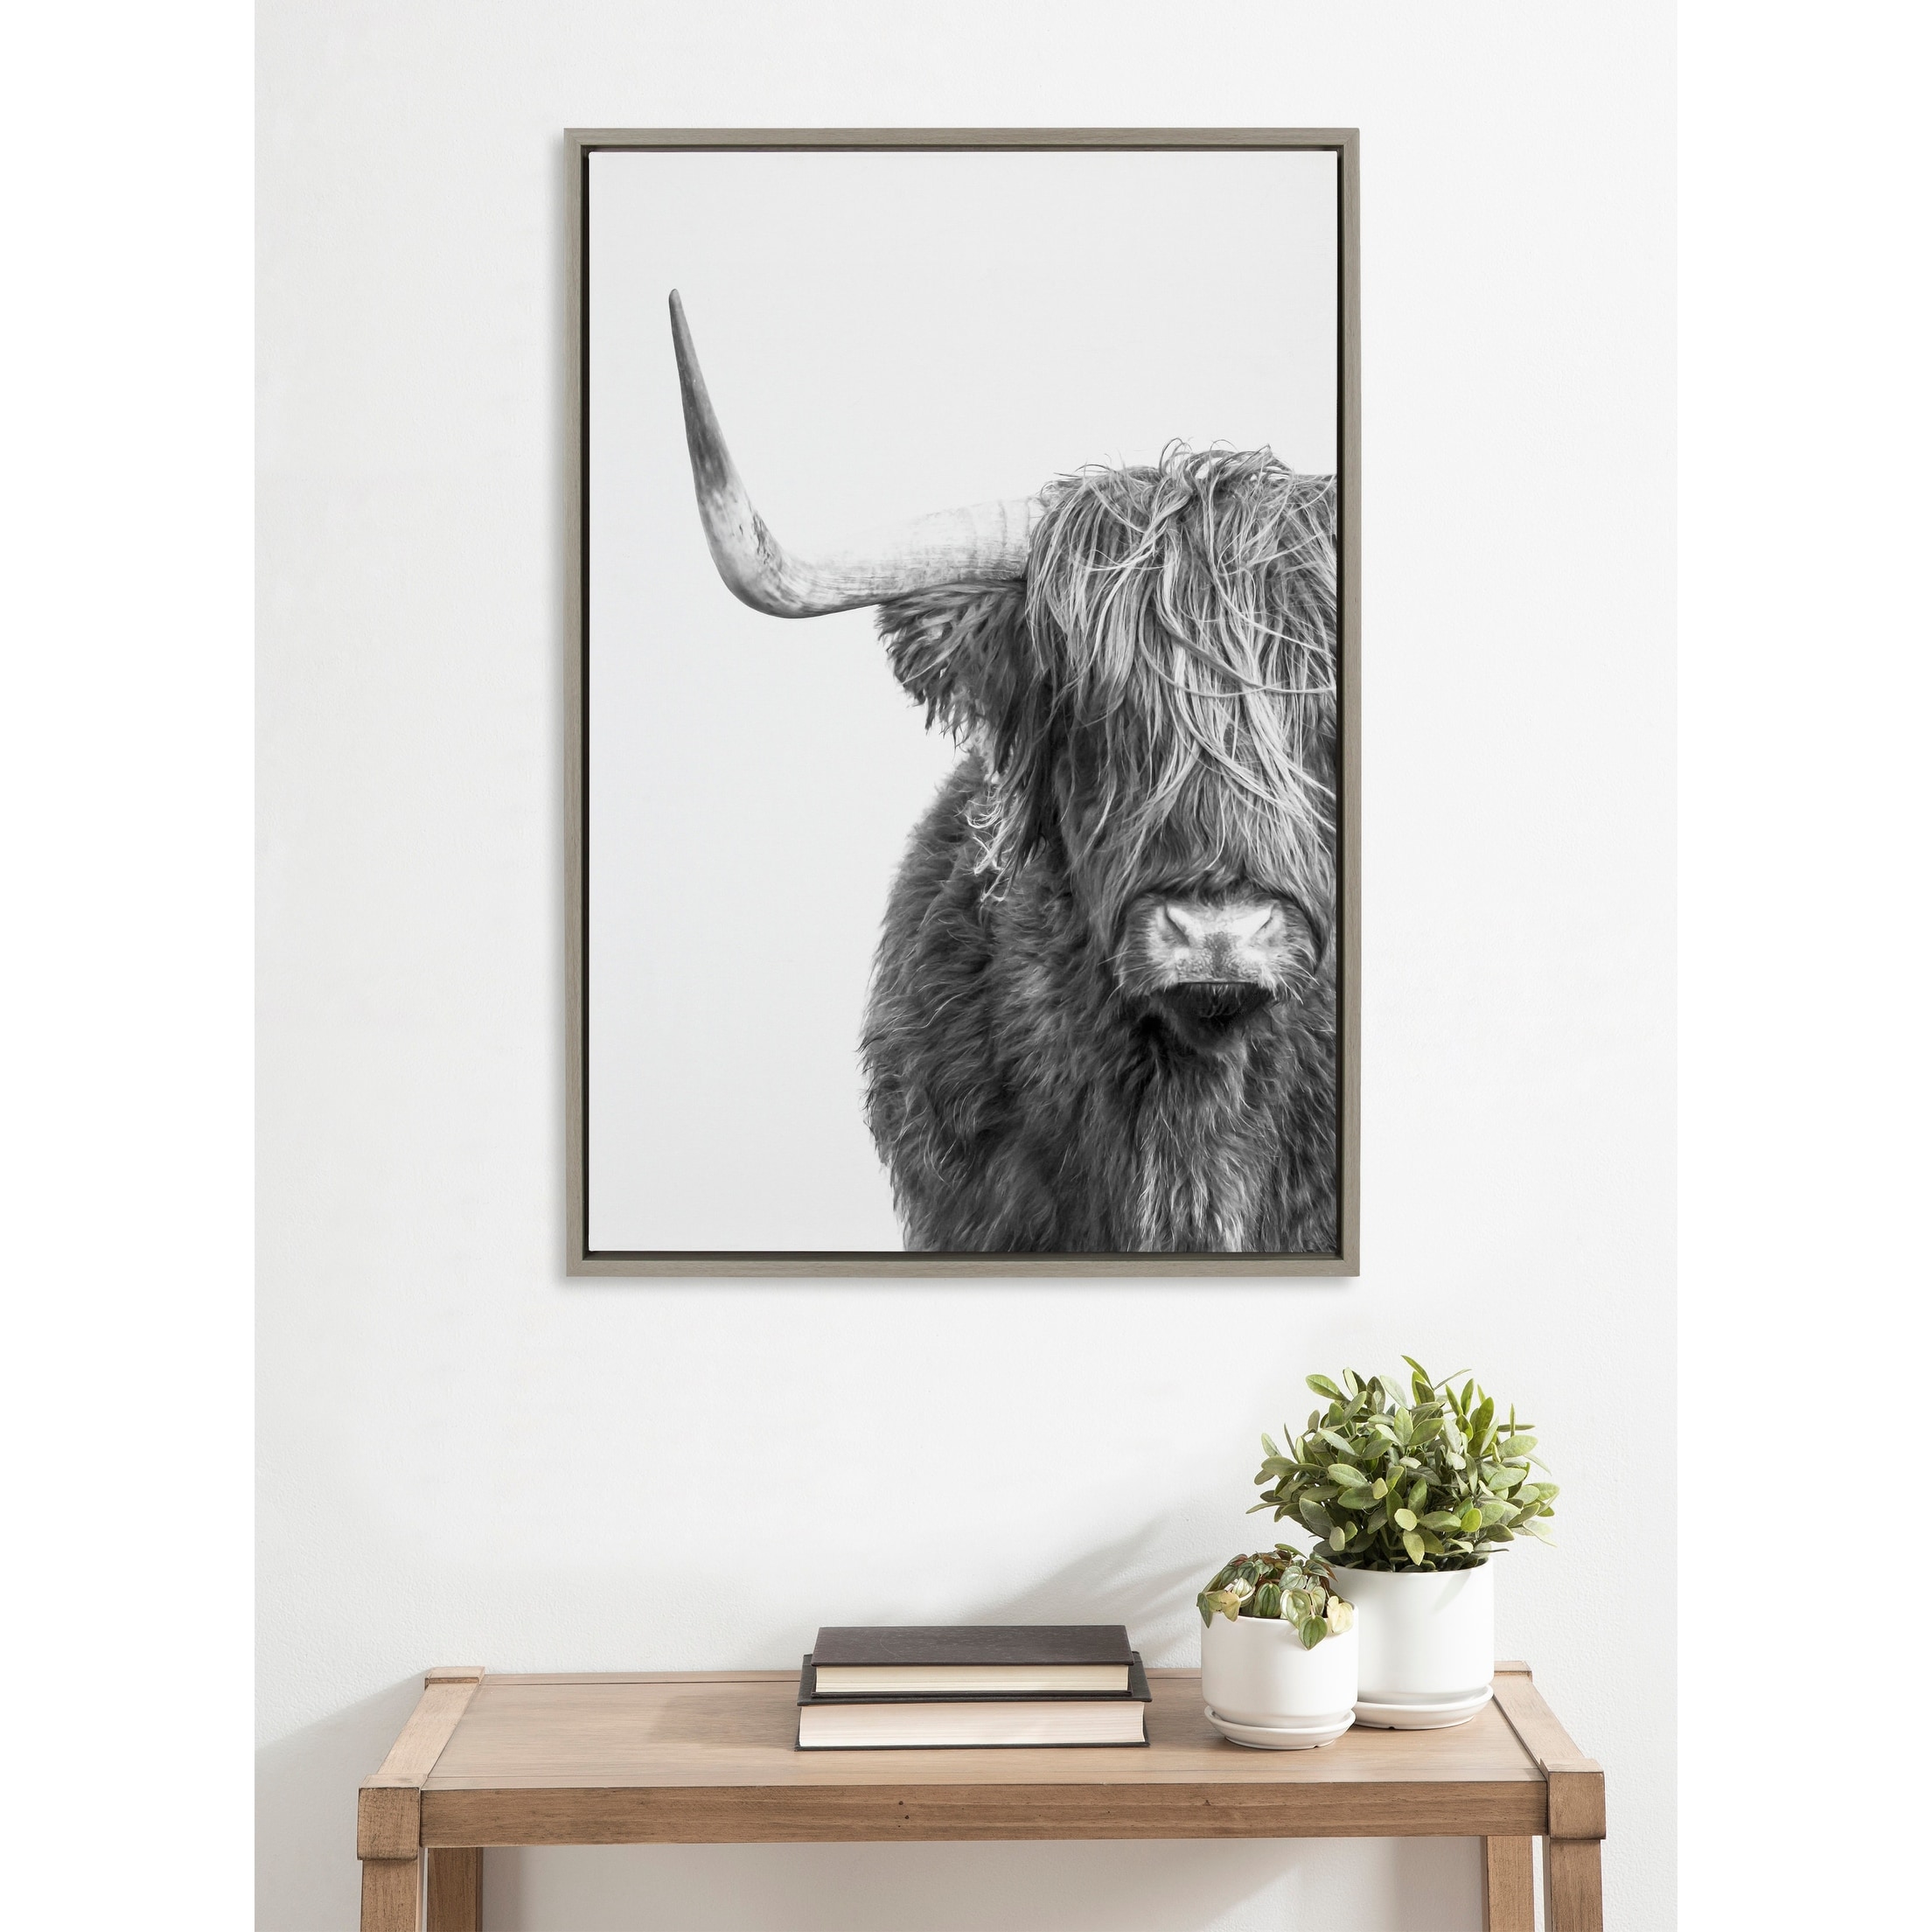 https://ak1.ostkcdn.com/images/products/is/images/direct/ee3cf8bf8523bdd093d7ffbad1805841125dfee8/Kate-and-Laurel-Sylvie-B%26W-Highland-Cow-No.-1-Framed-Canvas-by-Amy-Peterson-Art-Studio.jpg